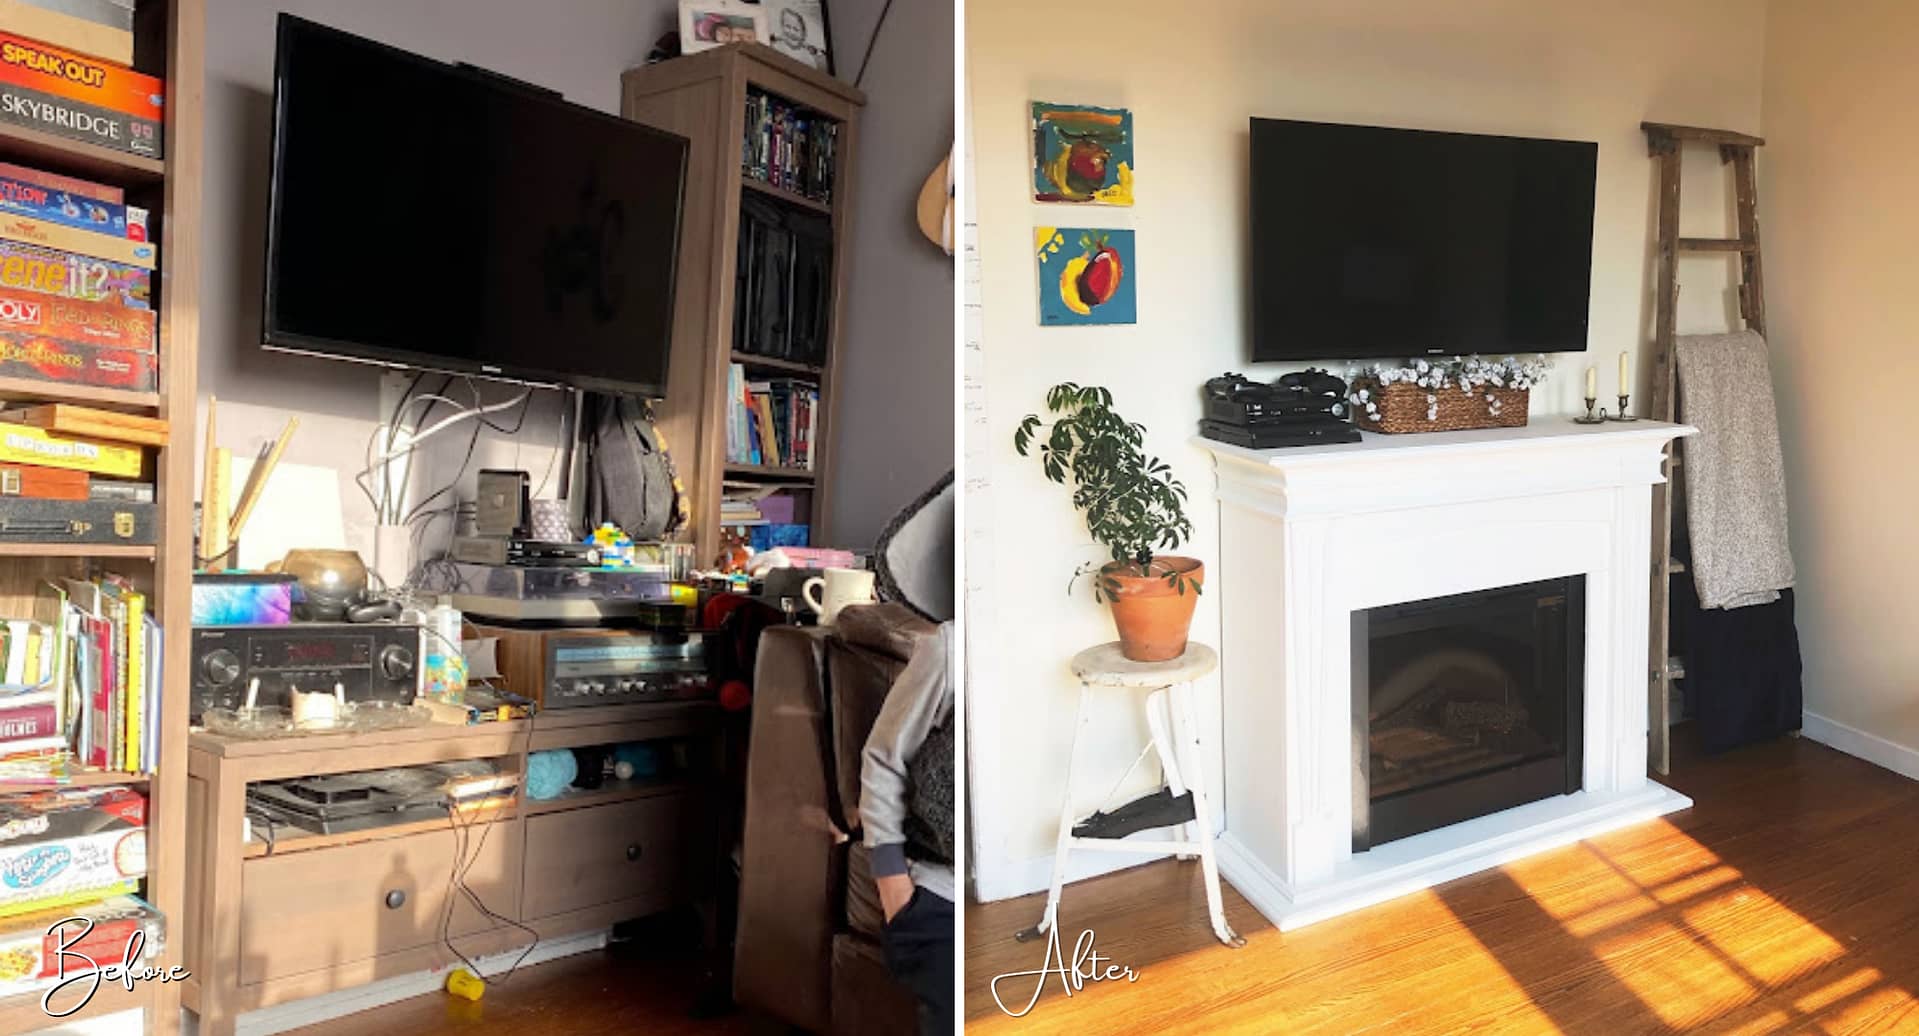  before and after of the fireplace wall